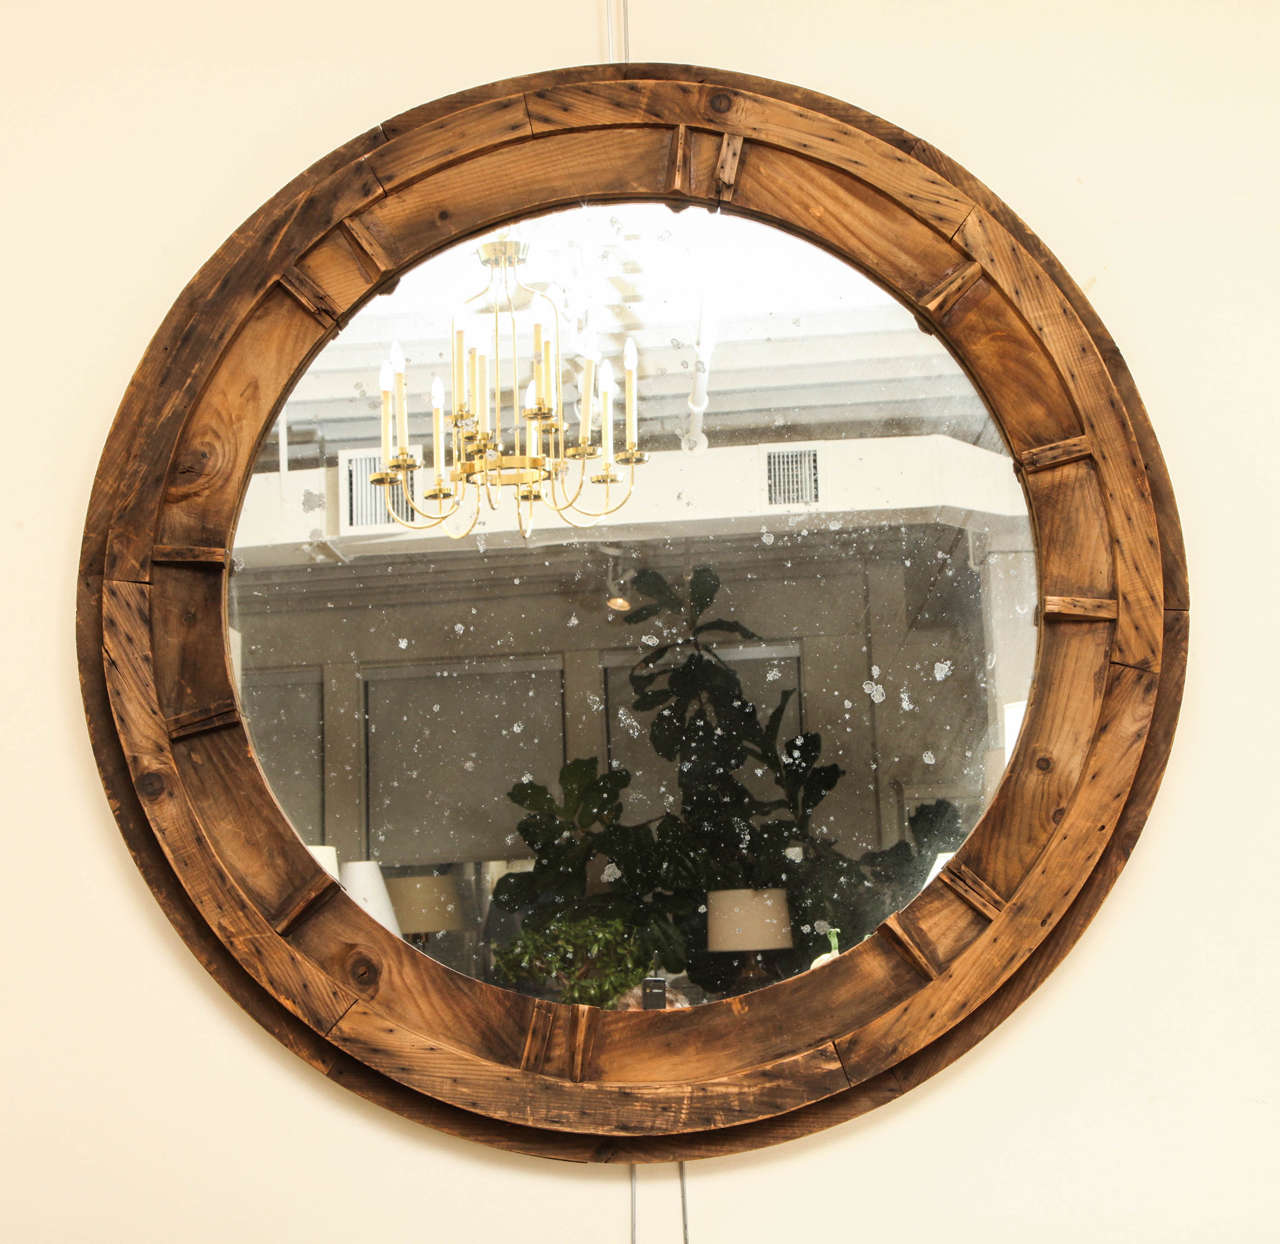 Large round rustic wooden sandmold mirror with antiqued mirror glass